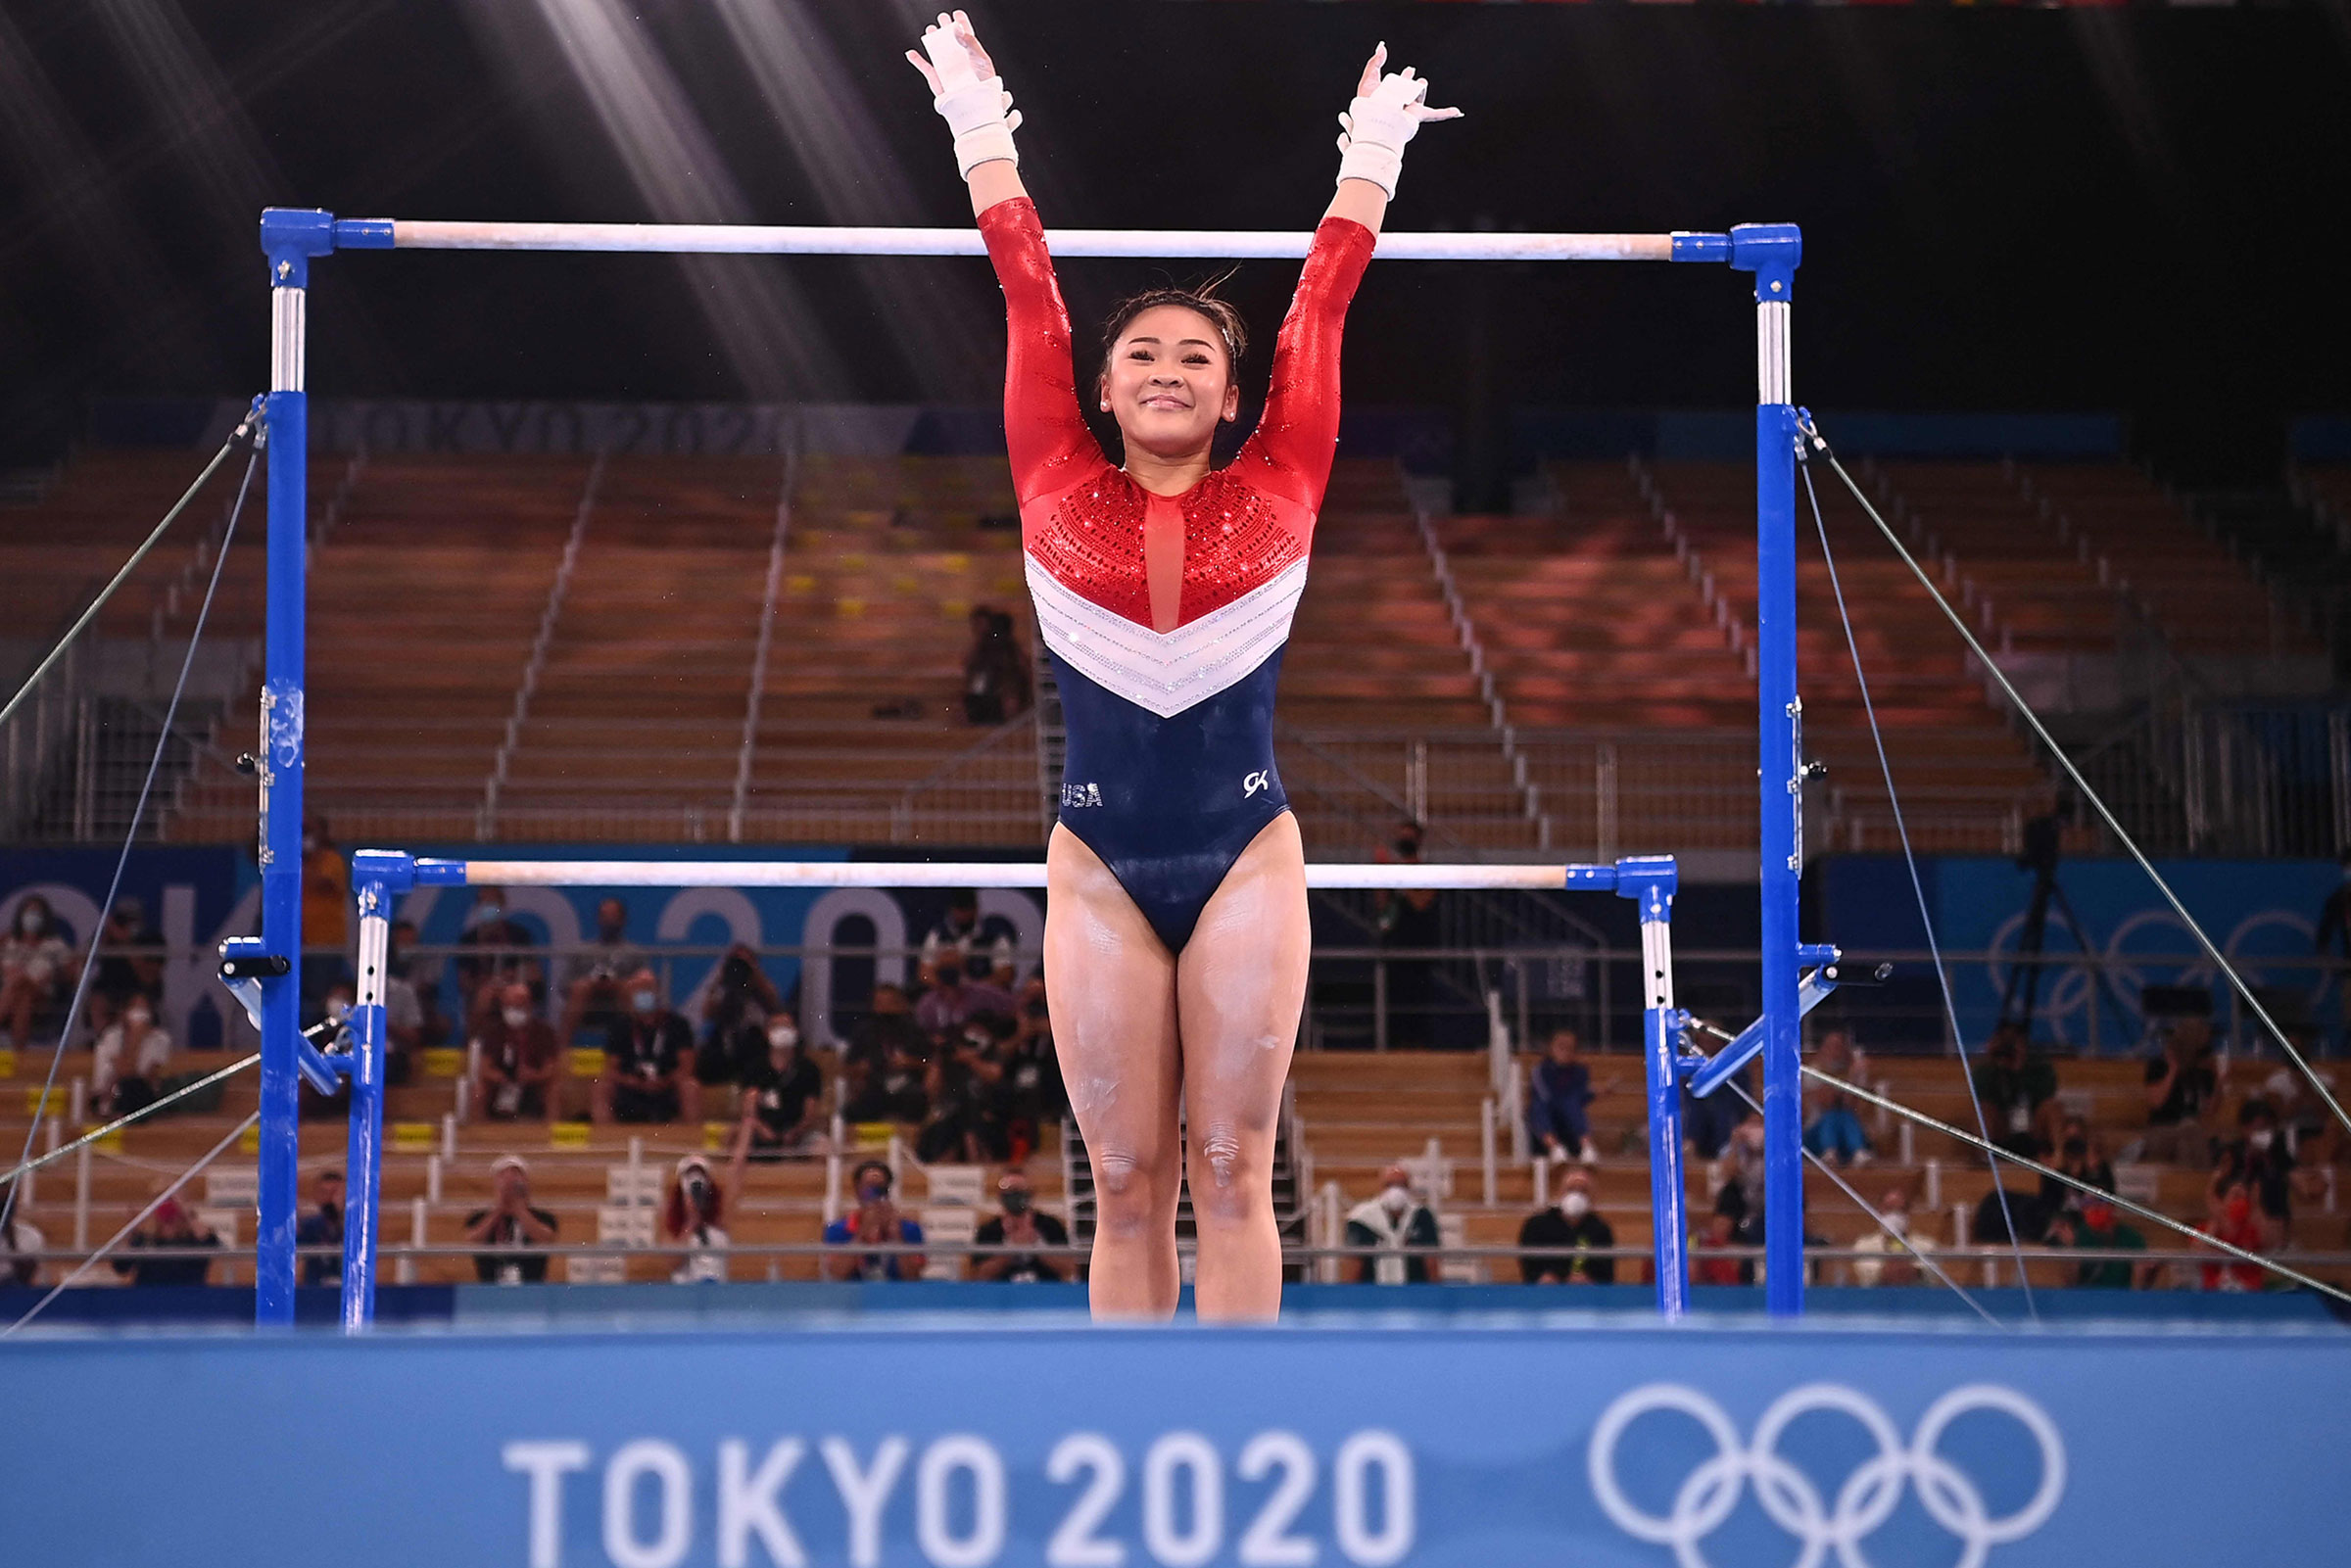 USA's Sunisa Lee reacts after competing in the uneven bars event of the artistic gymnastics women's team final during the Tokyo 2020 Olympic Games at the Ariake Gymnastics Centre in Tokyo on July 27, 2021. (Loic Venance—AFP/Getty Images)